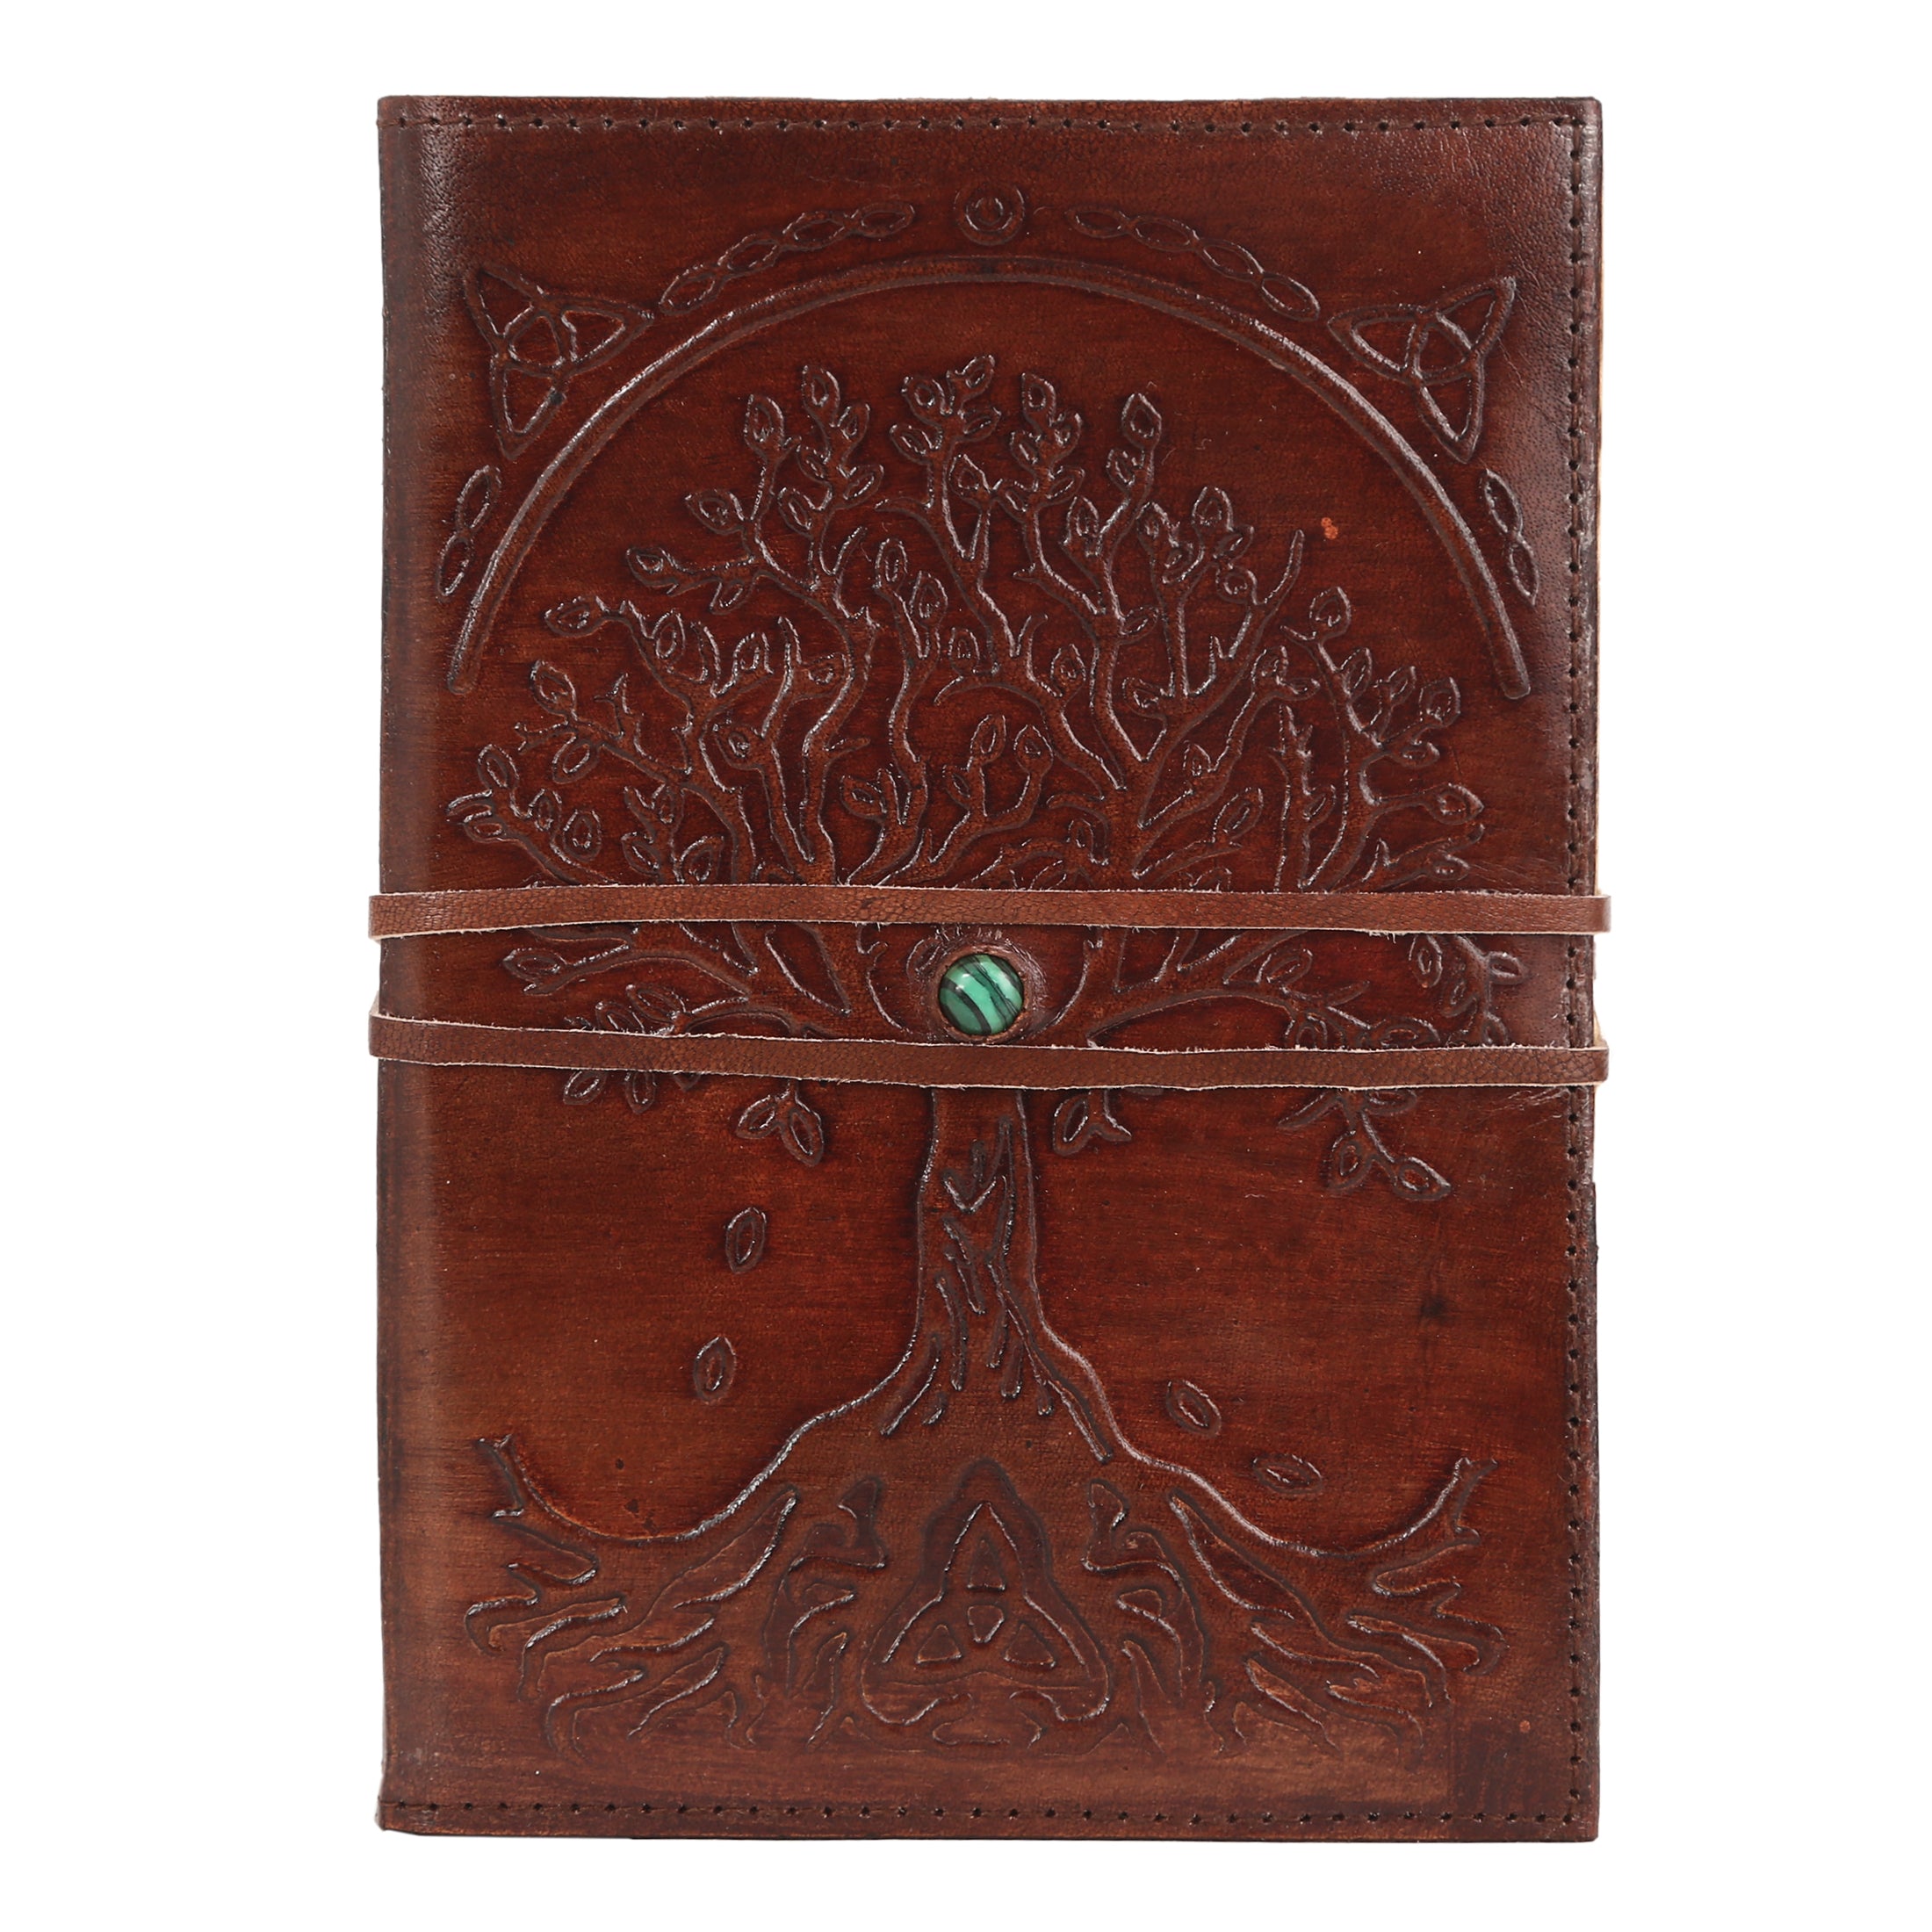 Leather Journal Refillable Lined Deckle Paper Tree of Life Handmade wr